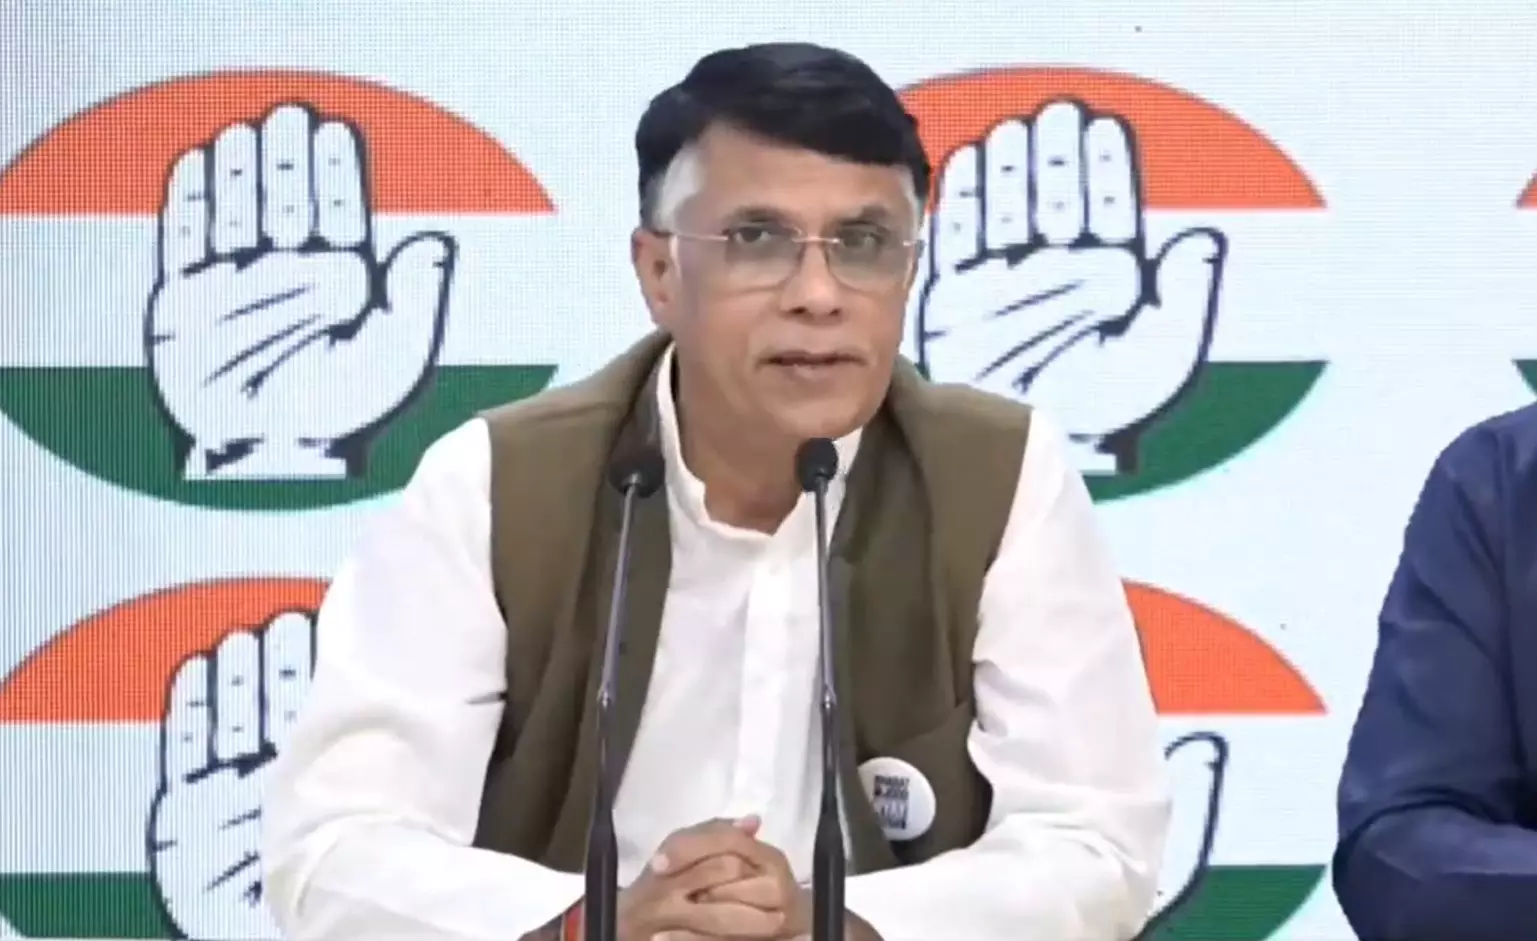 Last chance to save democracy, Constitution from dictatorship: Congress